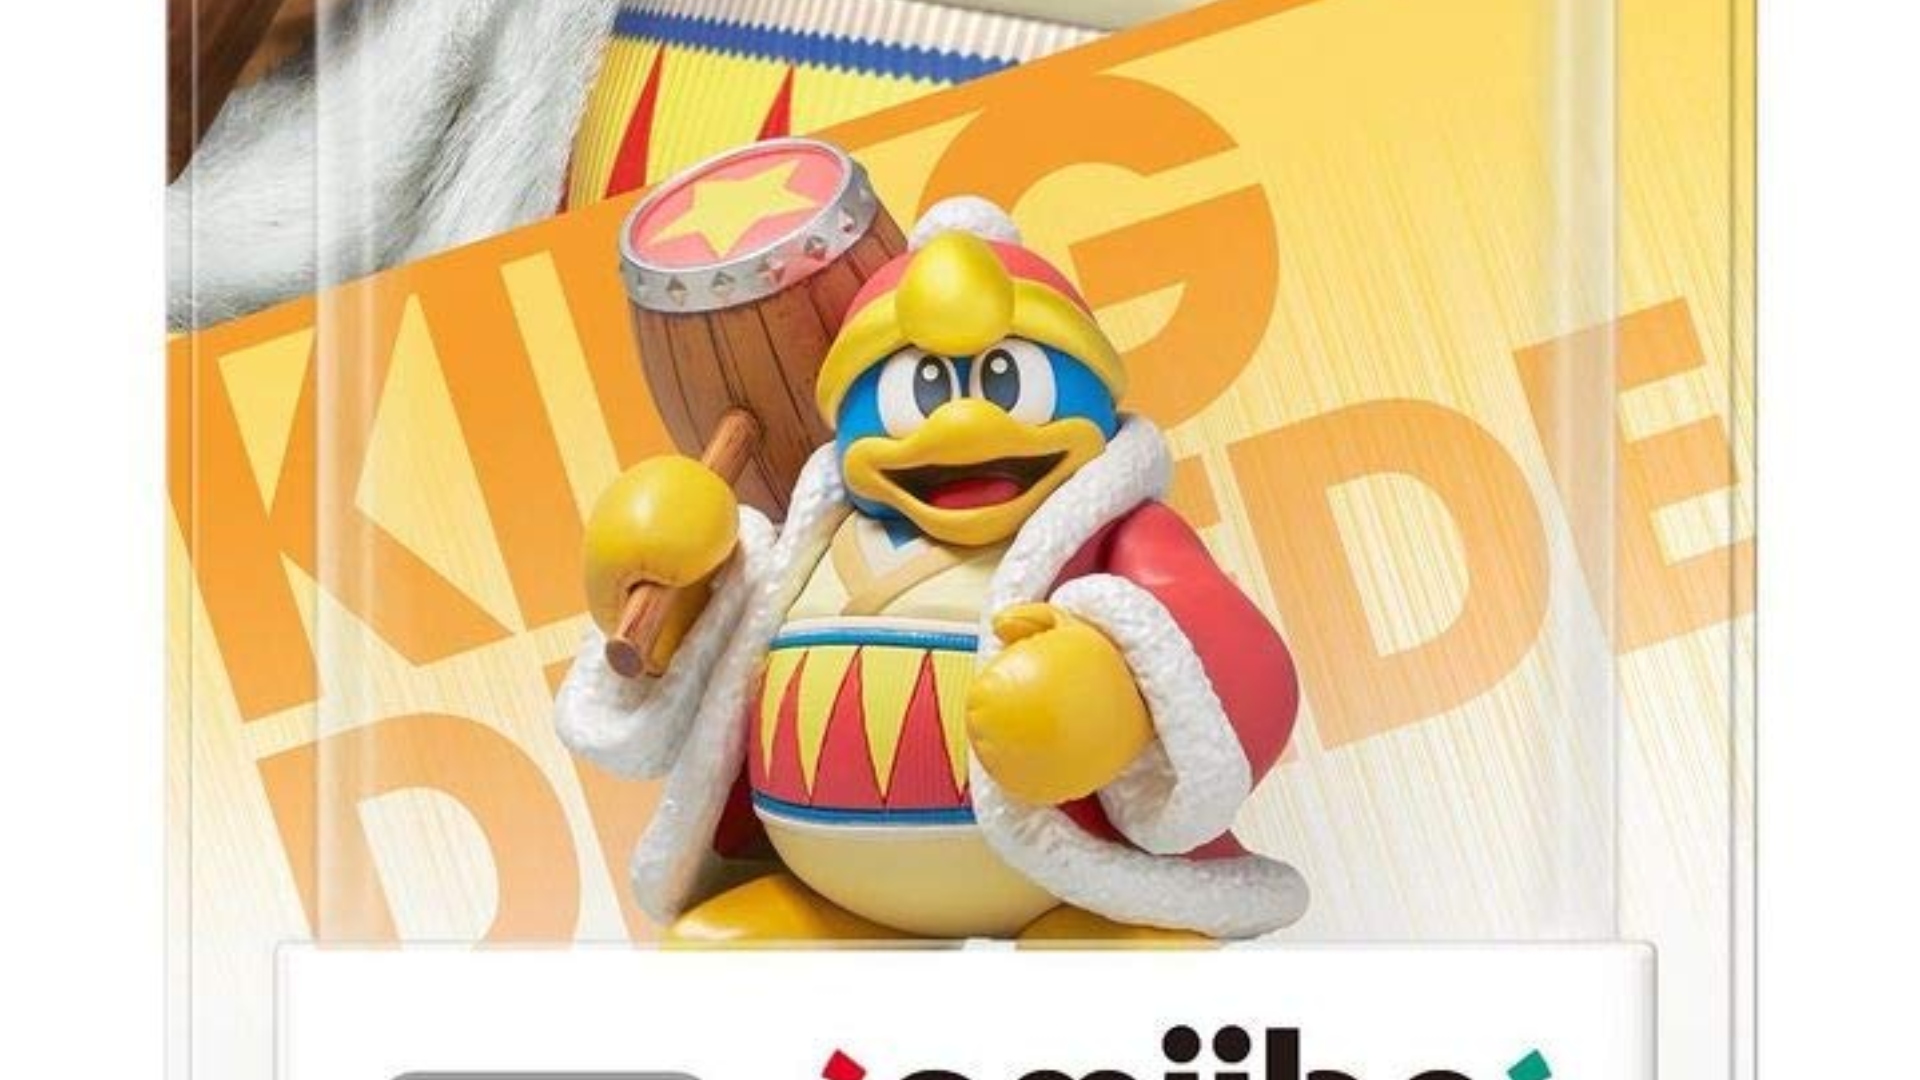 This King Dedede amiibo from the Kirby series is now 26% off